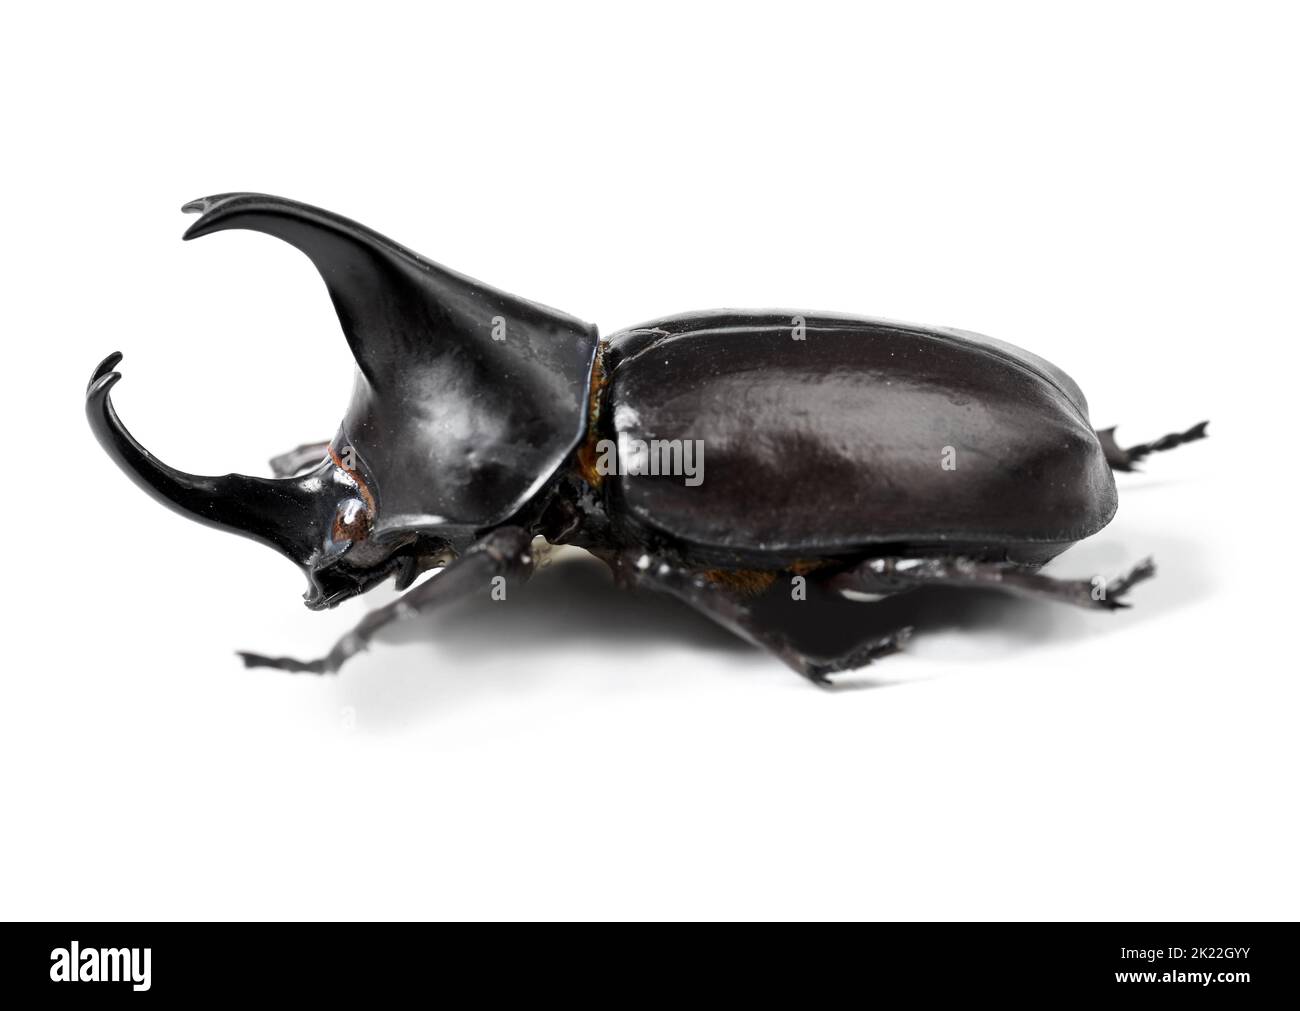 dynamite comes in small packages. Closeup side view of a rhinoceros beetle. Stock Photo